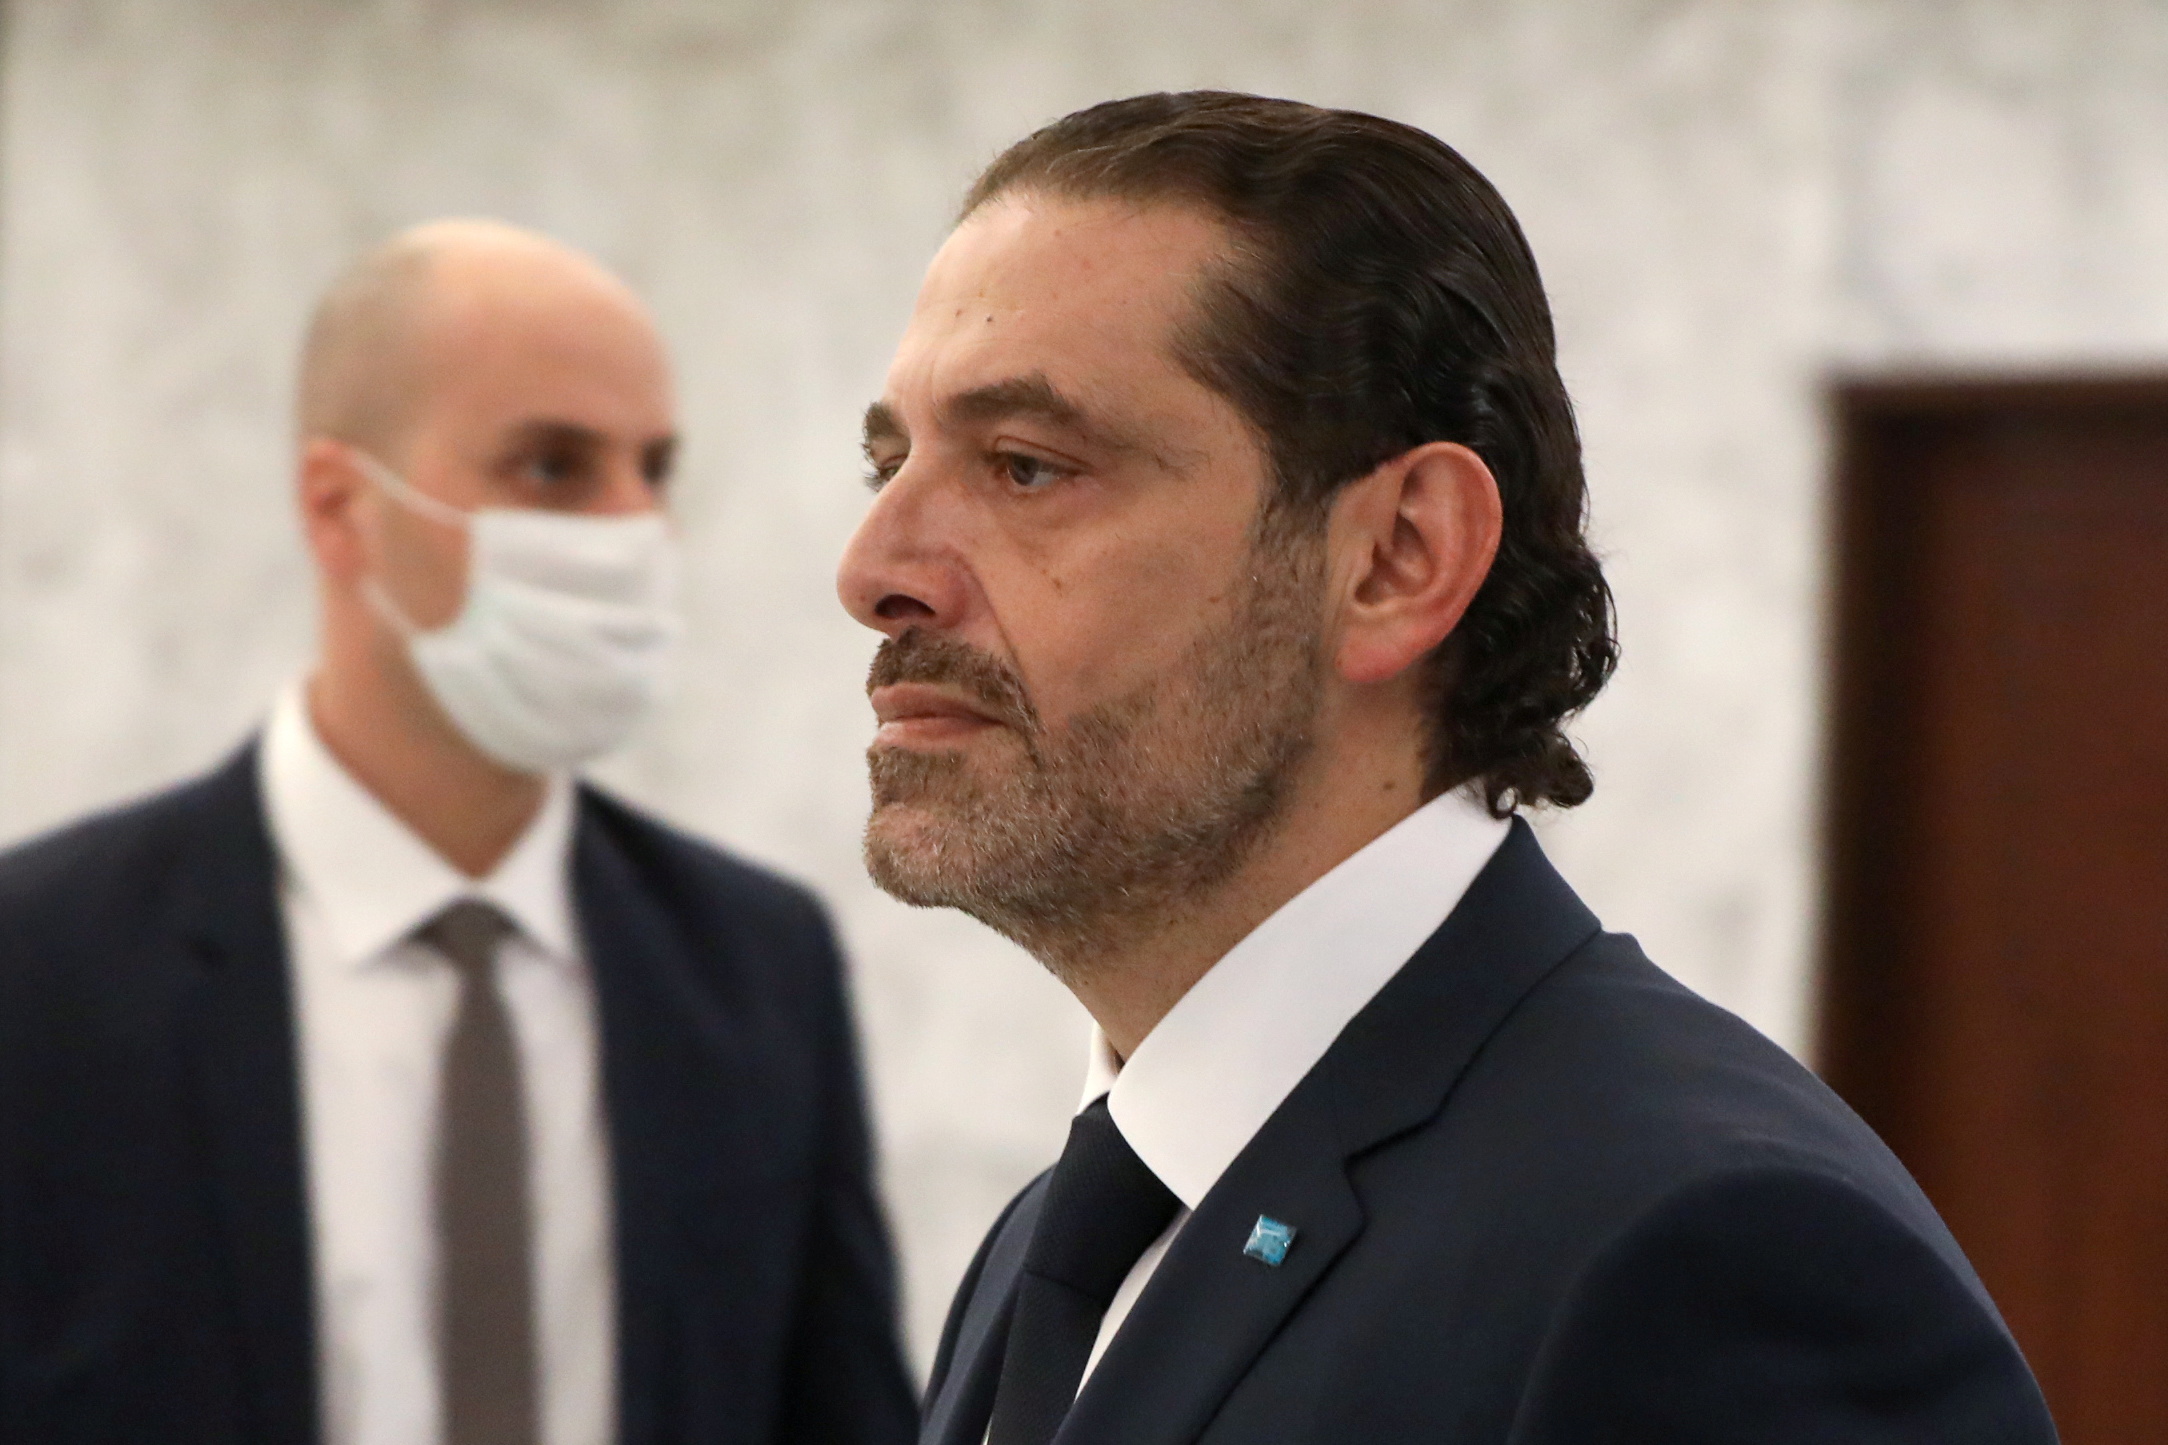 Prime Minister-designate Saad al-Hariri walks after meeting with Lebanon's President Michel Aoun at the presidential palace in Baabda